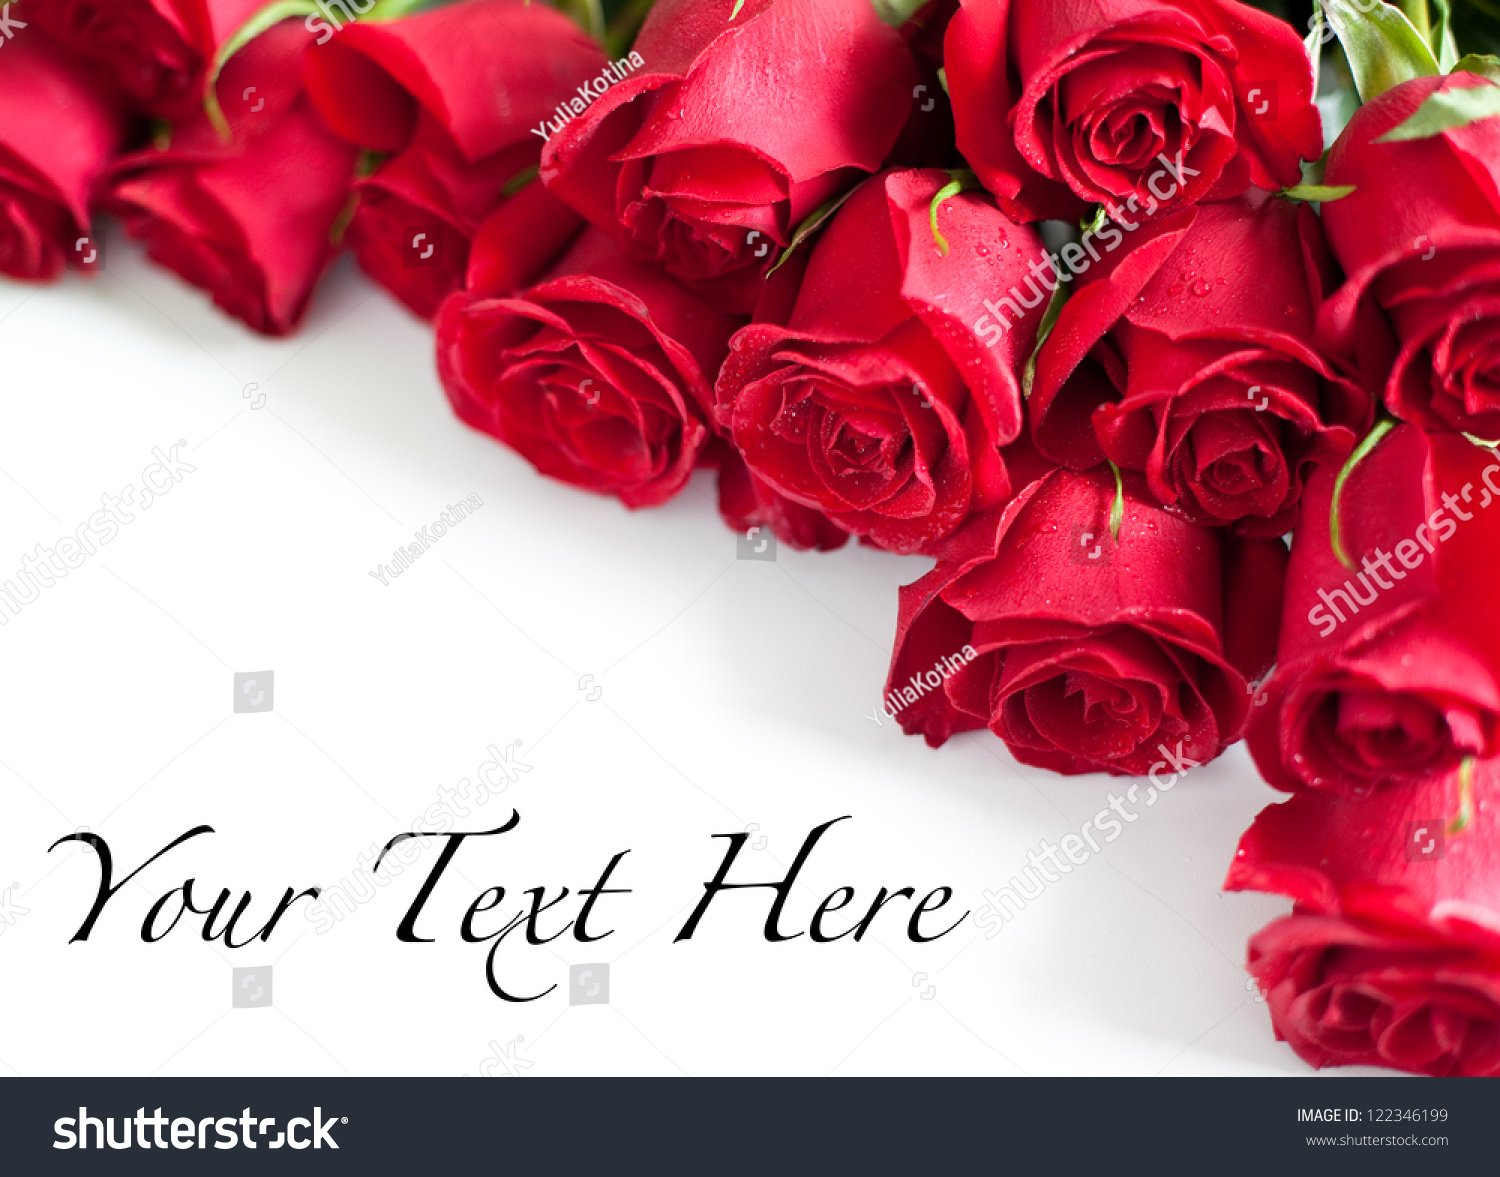 Red Roses On White Background Stock Photo 122346199